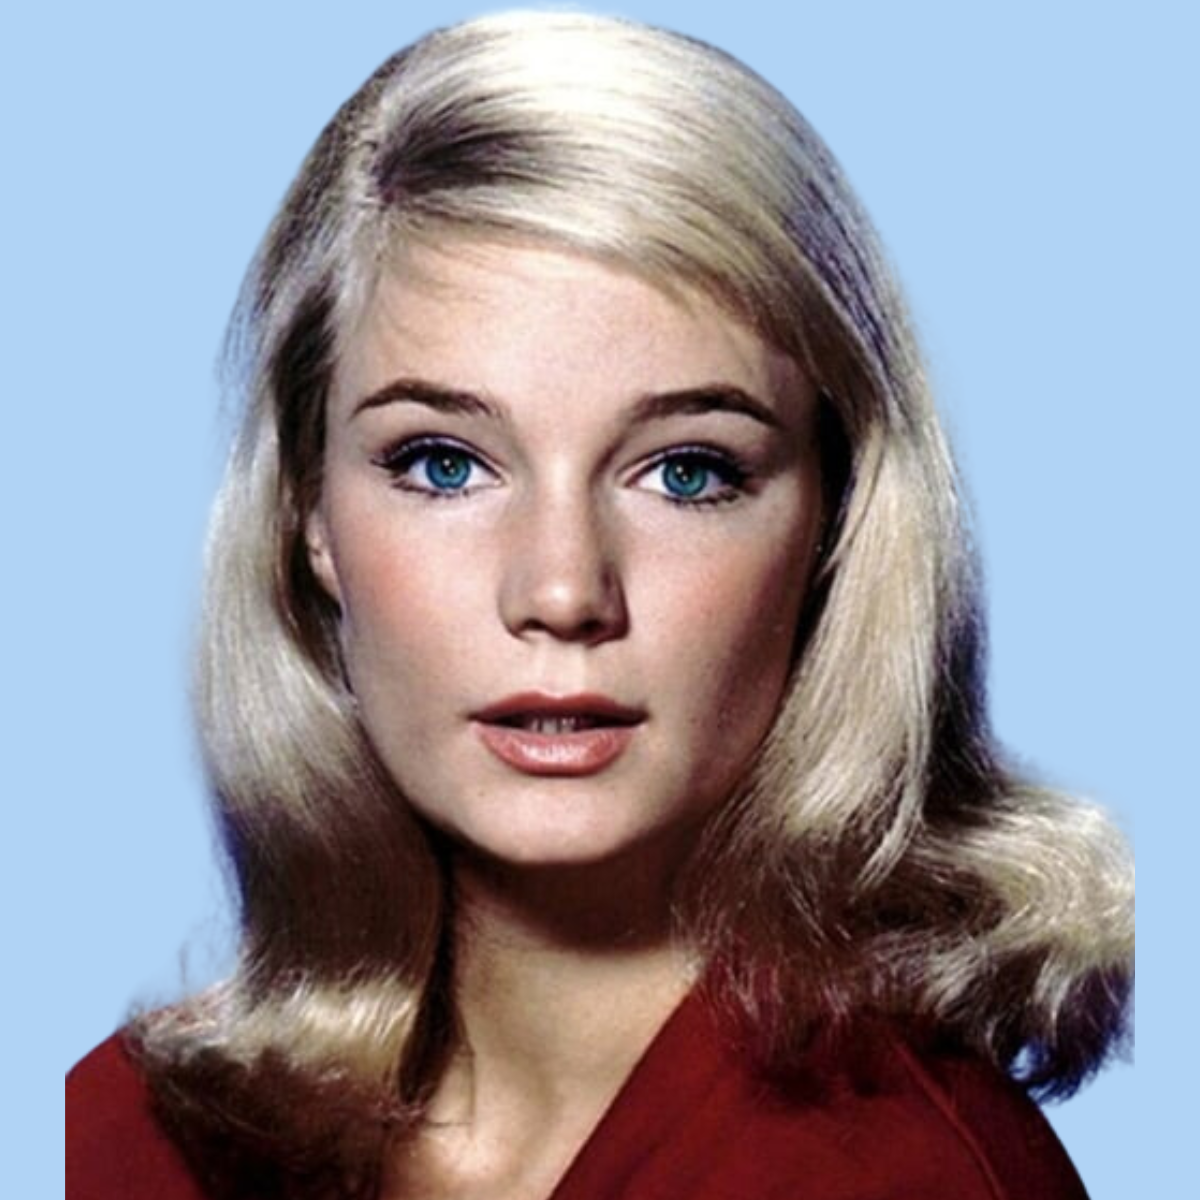 Whatever Happened to Yvette Mimieux? (Classic Film Star)